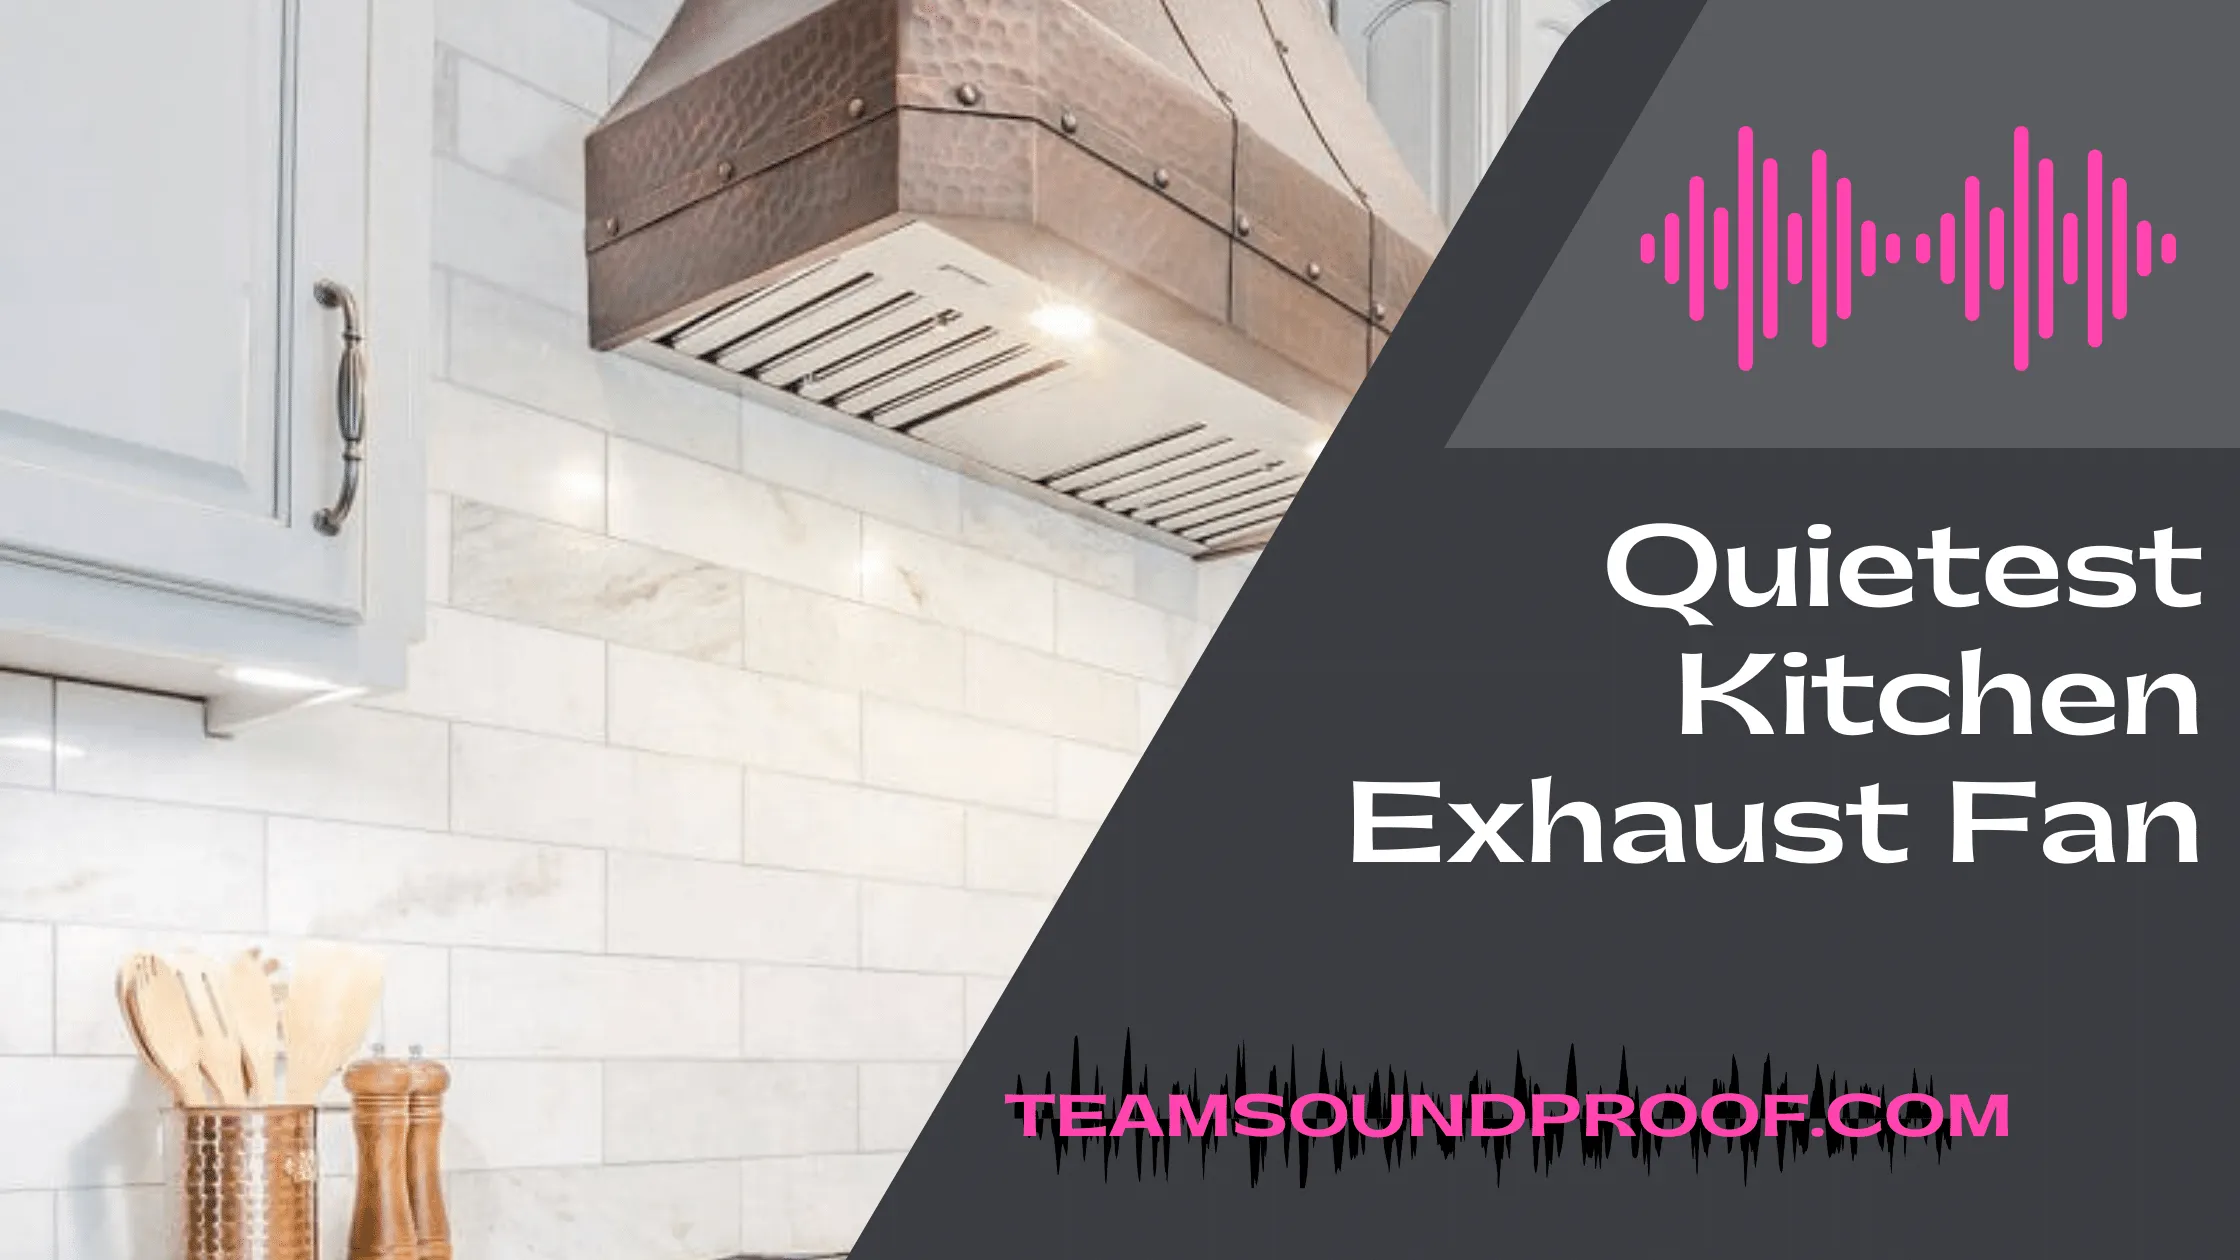 Quietest Kitchen Exhaust Fan - Complete Shopping Tips